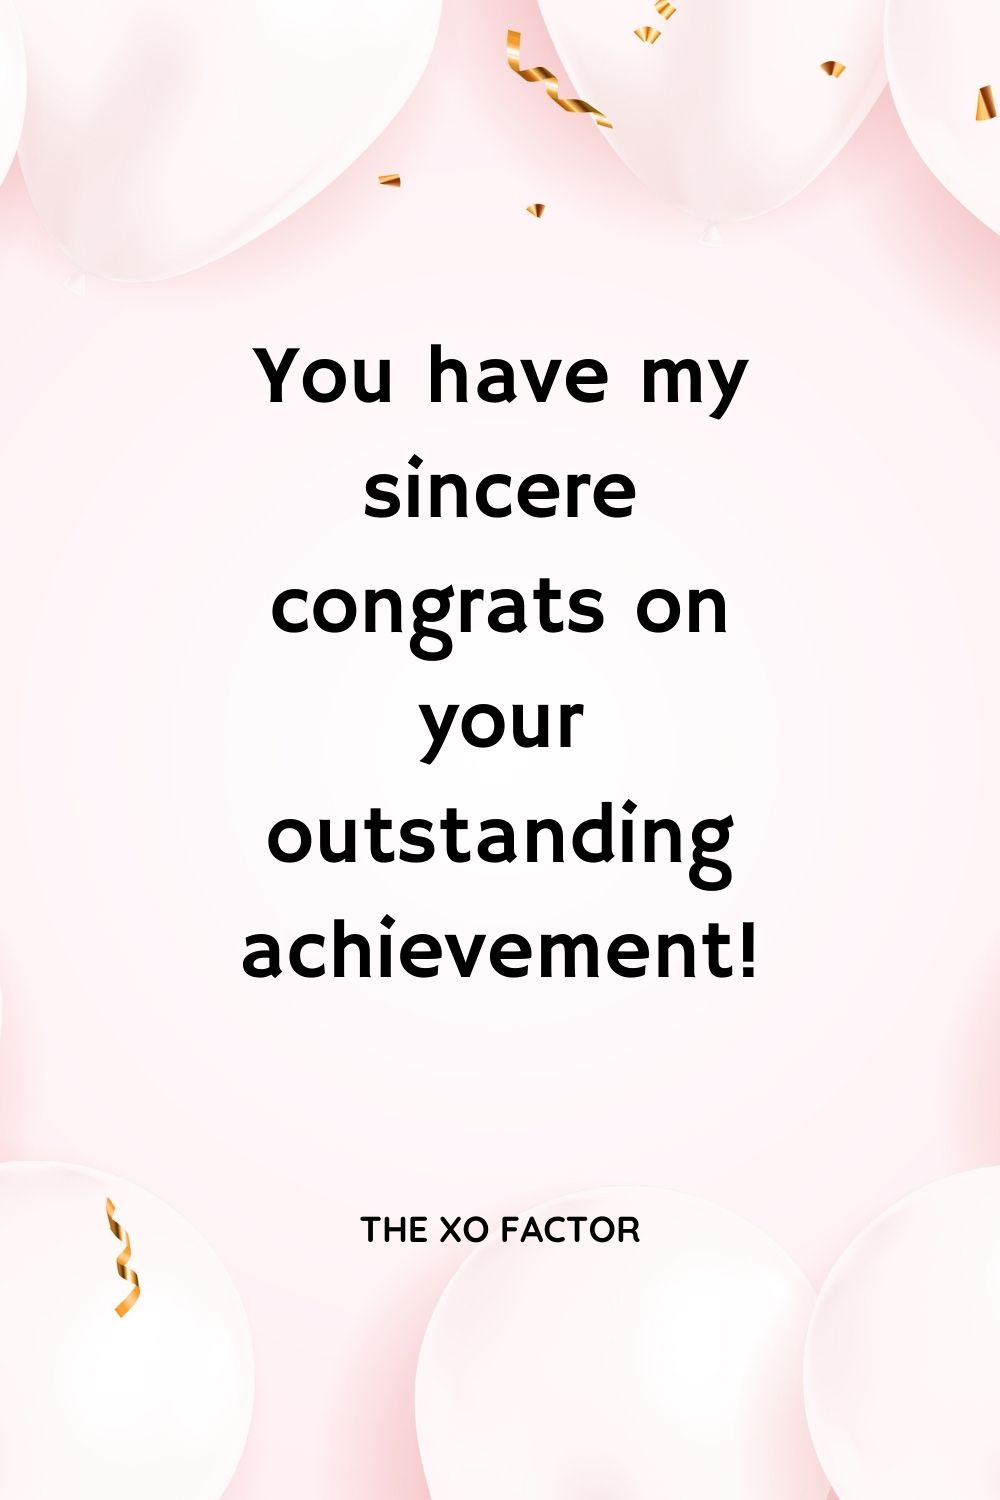 You have my sincere congrats on your outstanding achievement!